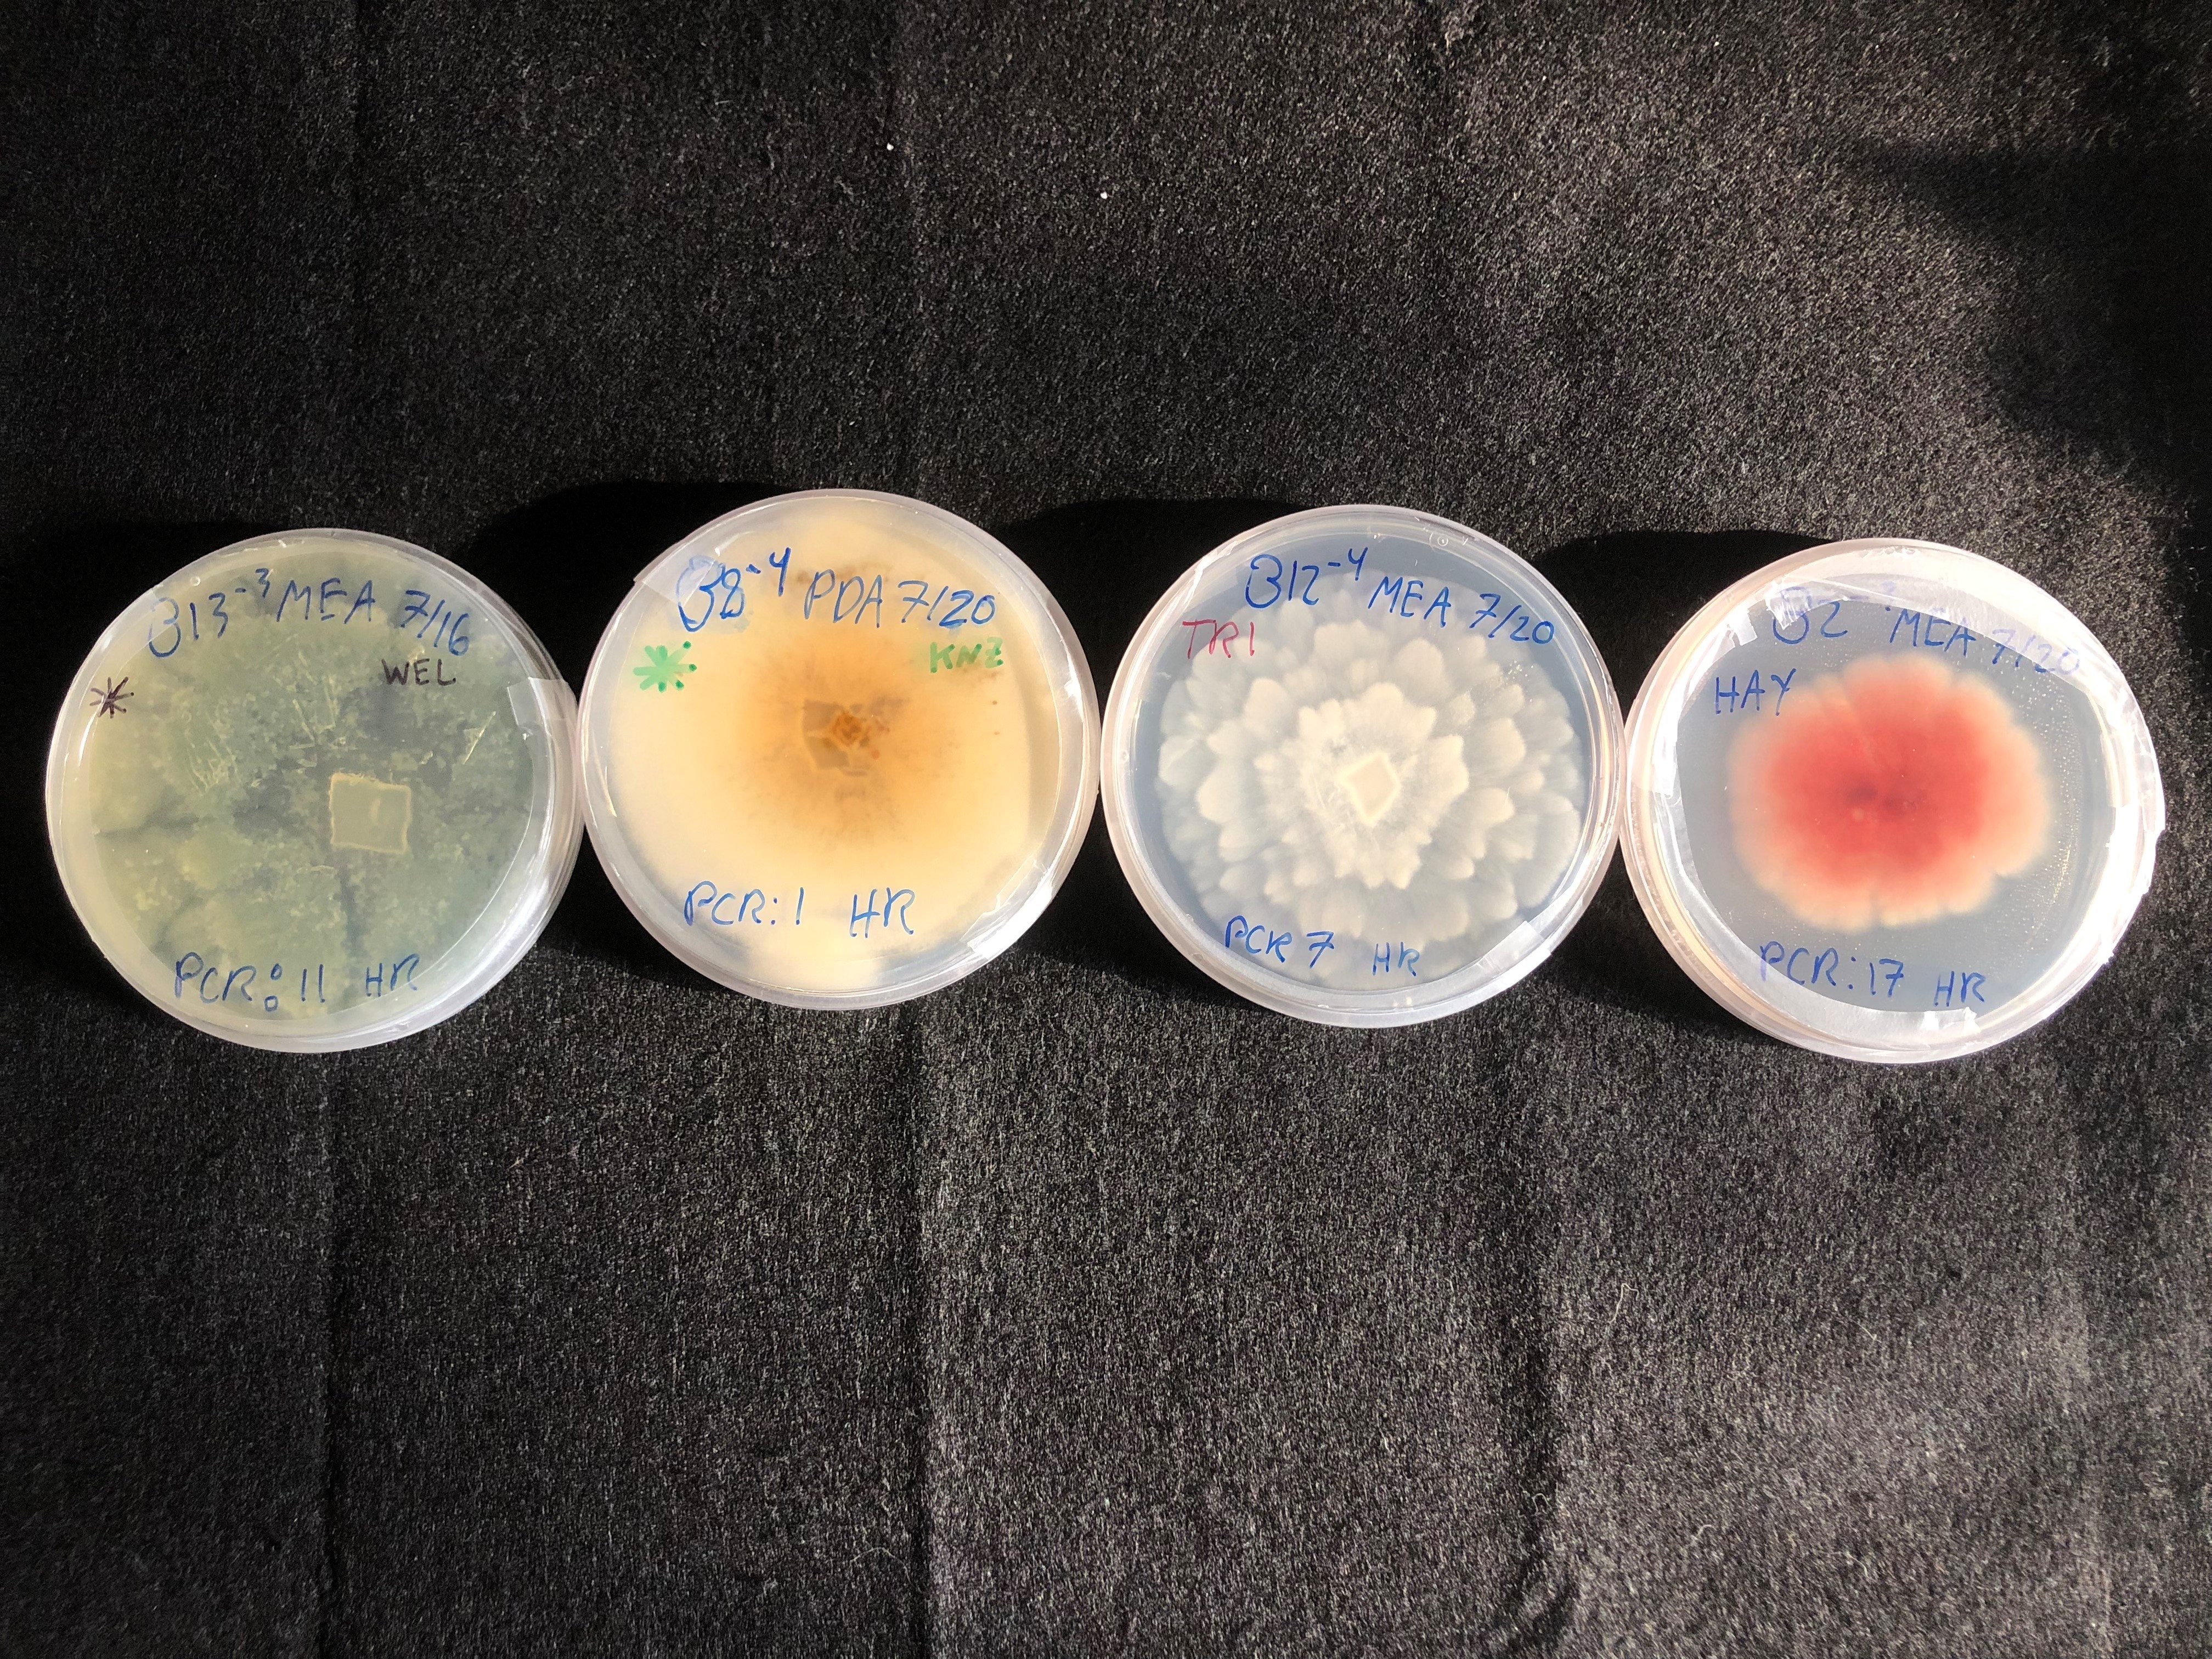 Fungi samples Hannah cultured for their summer project